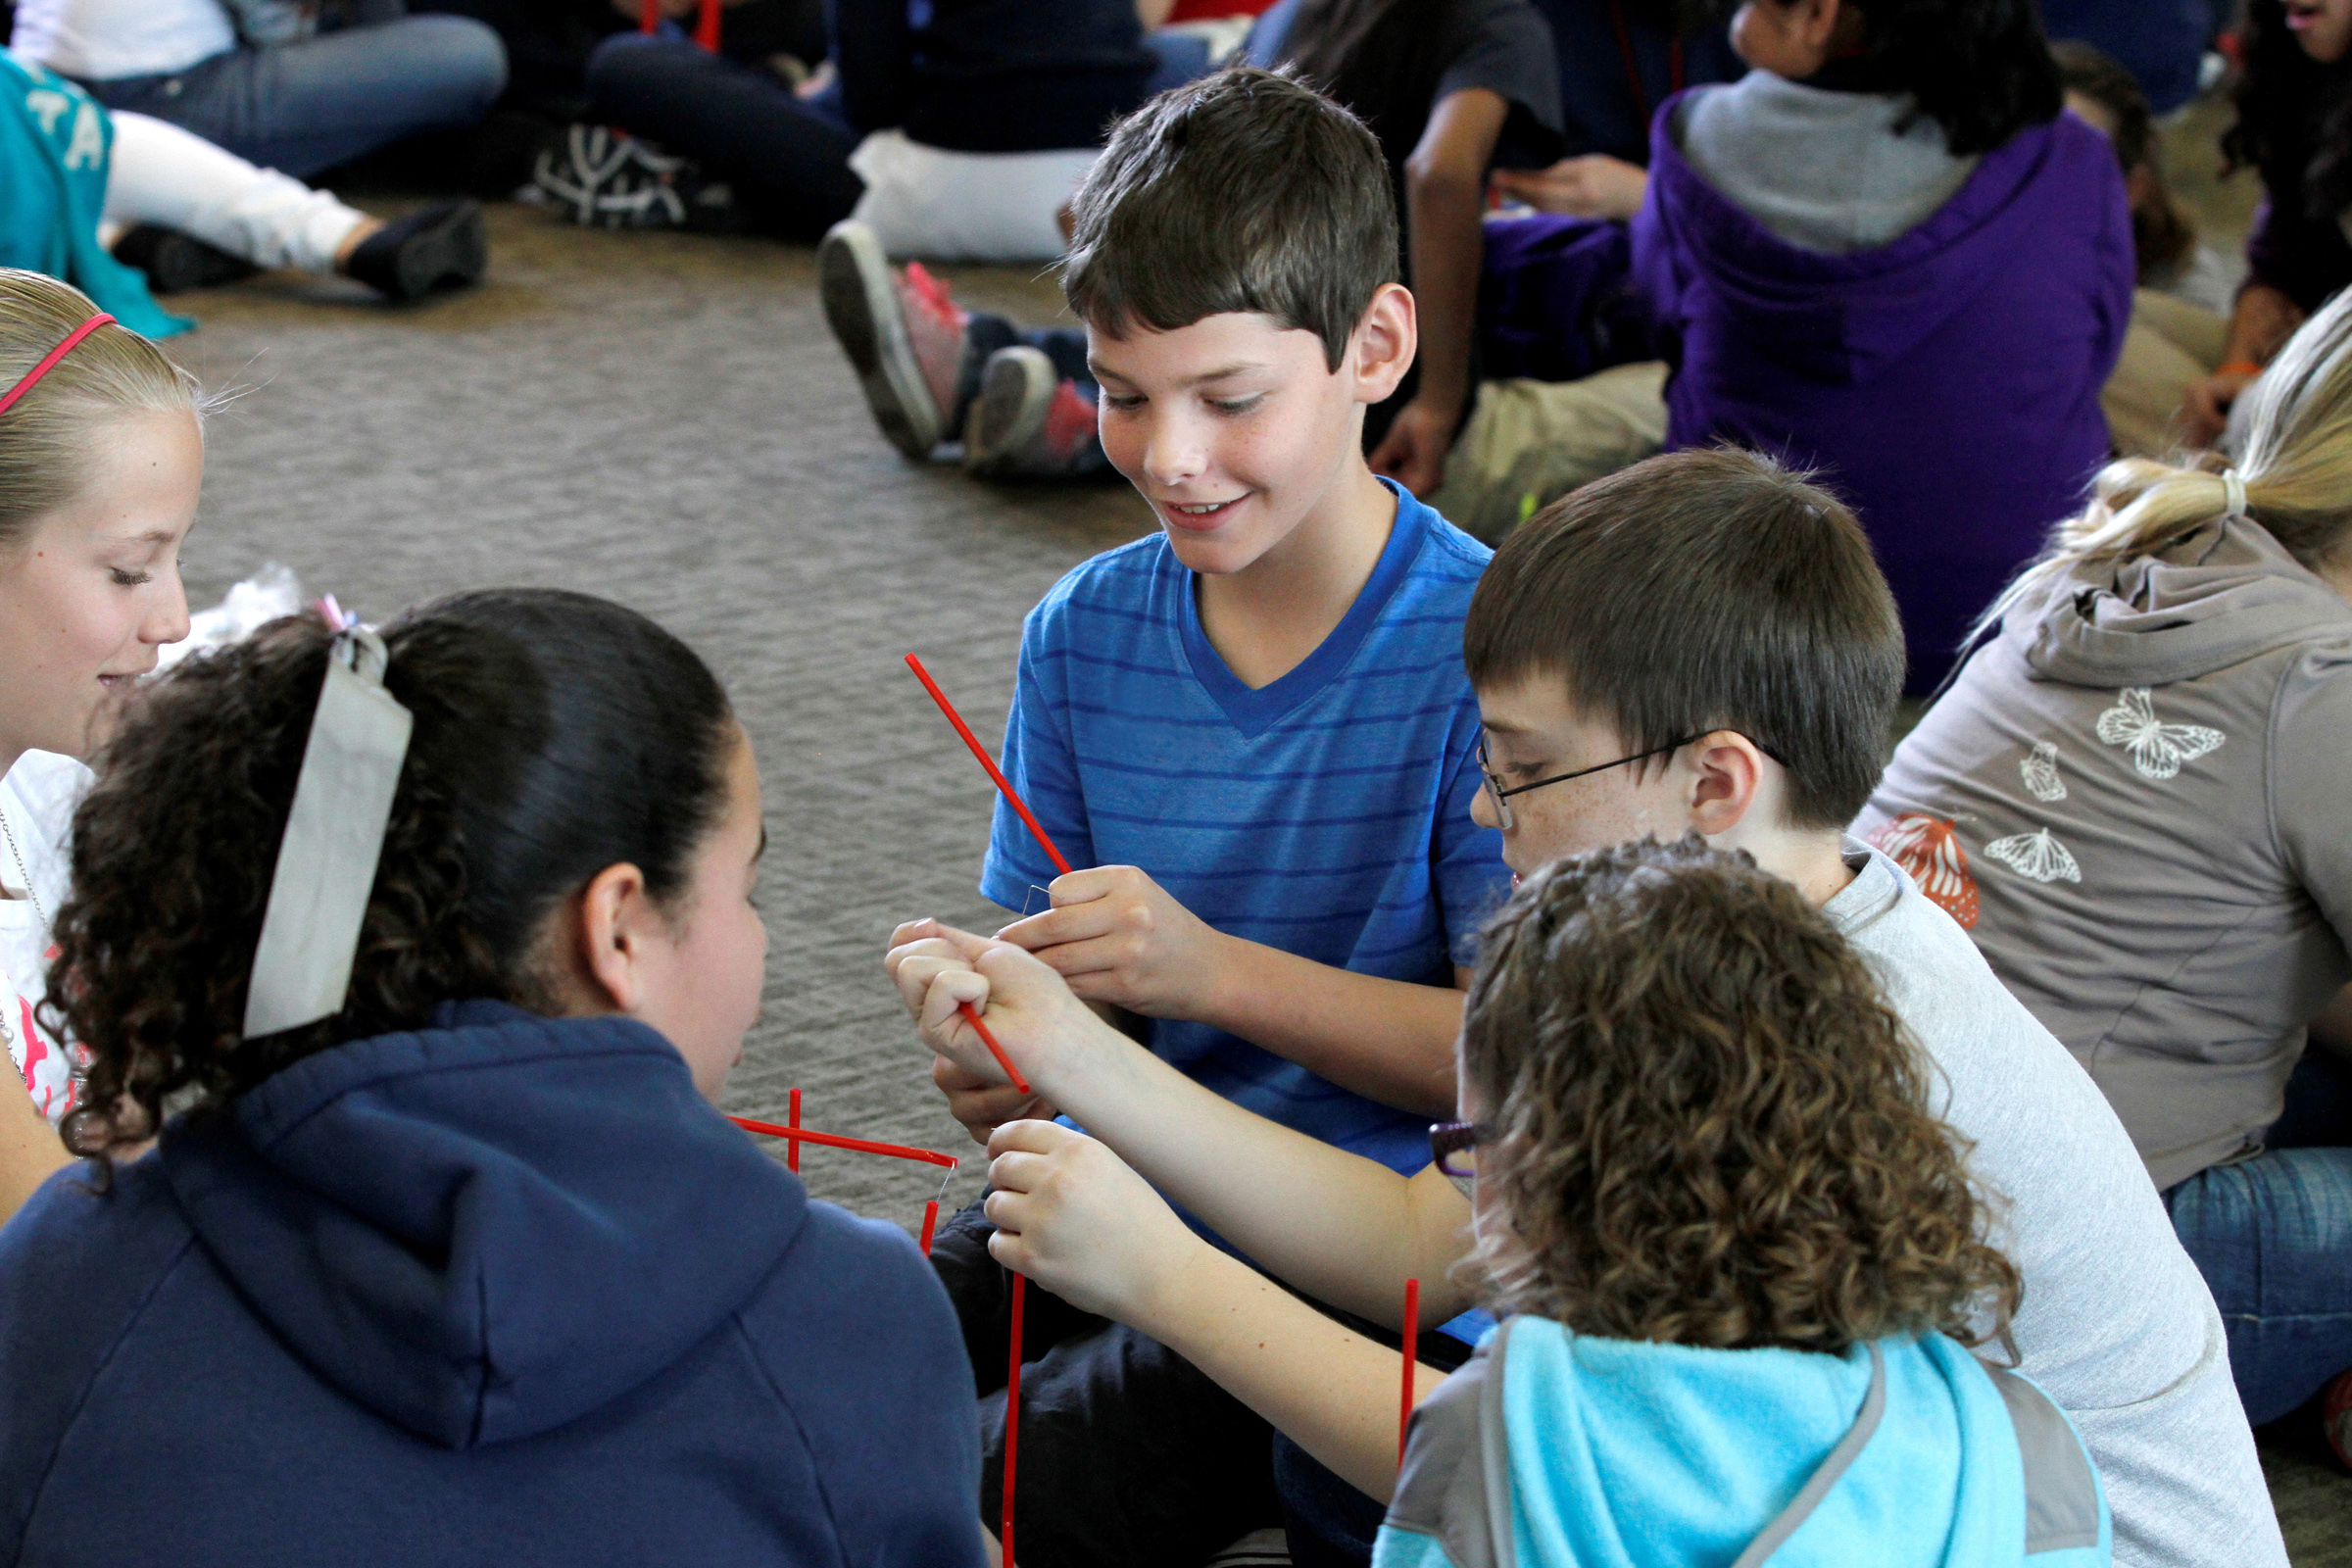 Students use plastic drinking straws to build towers that must withstand wind gusts during last year’s Elementary Engineering Week. This year’s event during March 24-28 will draw 2,000 Wasatch Front fifth- and sixth-graders. The week of activities is hosted by the University of Utah College of Engineering.